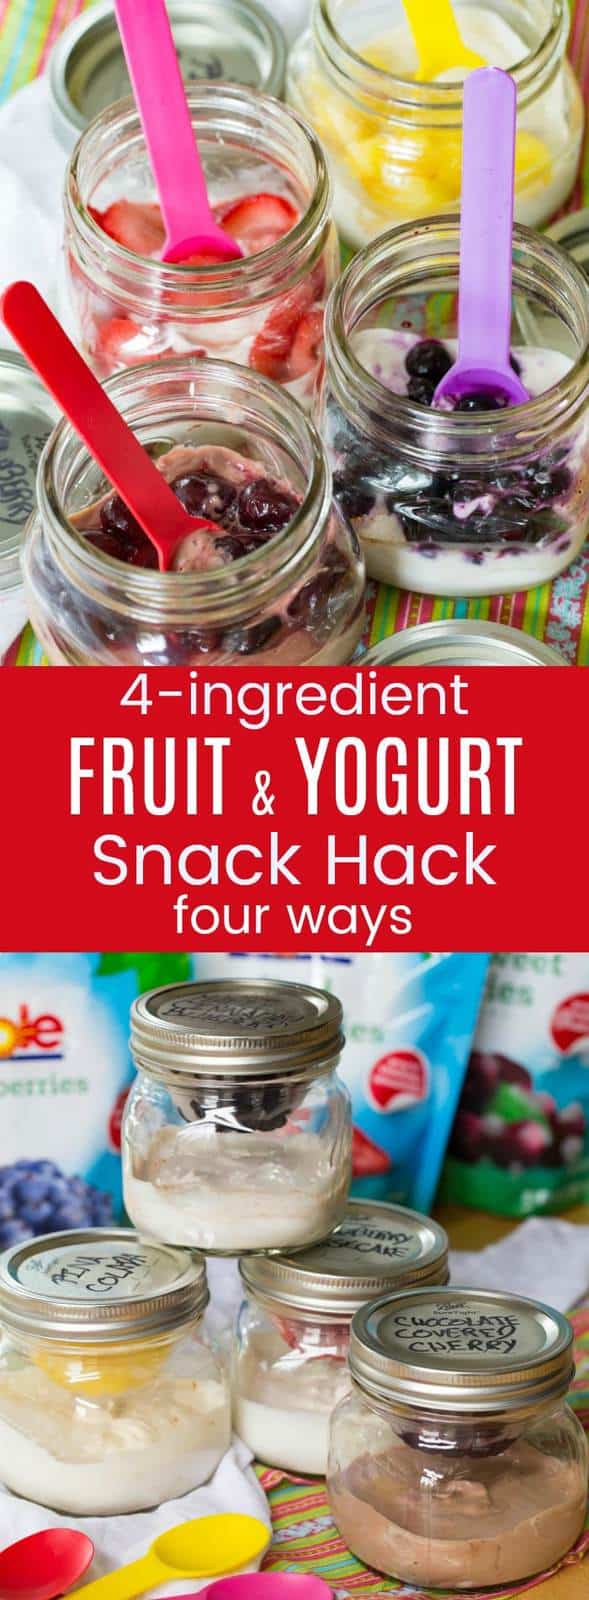 4-Ingredient Fruit and Yogurt Snack Hack - this snack recipe with a mason jar hack makes it easy to pack your favorite fruit and yogurt parfaits - Maple Cinnamon Blueberry, Strawberry Cheesecake, Chocolate Covered Cherry, and Pina Colada. Save your @dolesunshine Fruit Bowls to make these for breakfast, snack, or even dessert and #SharetheSunshine. #AD